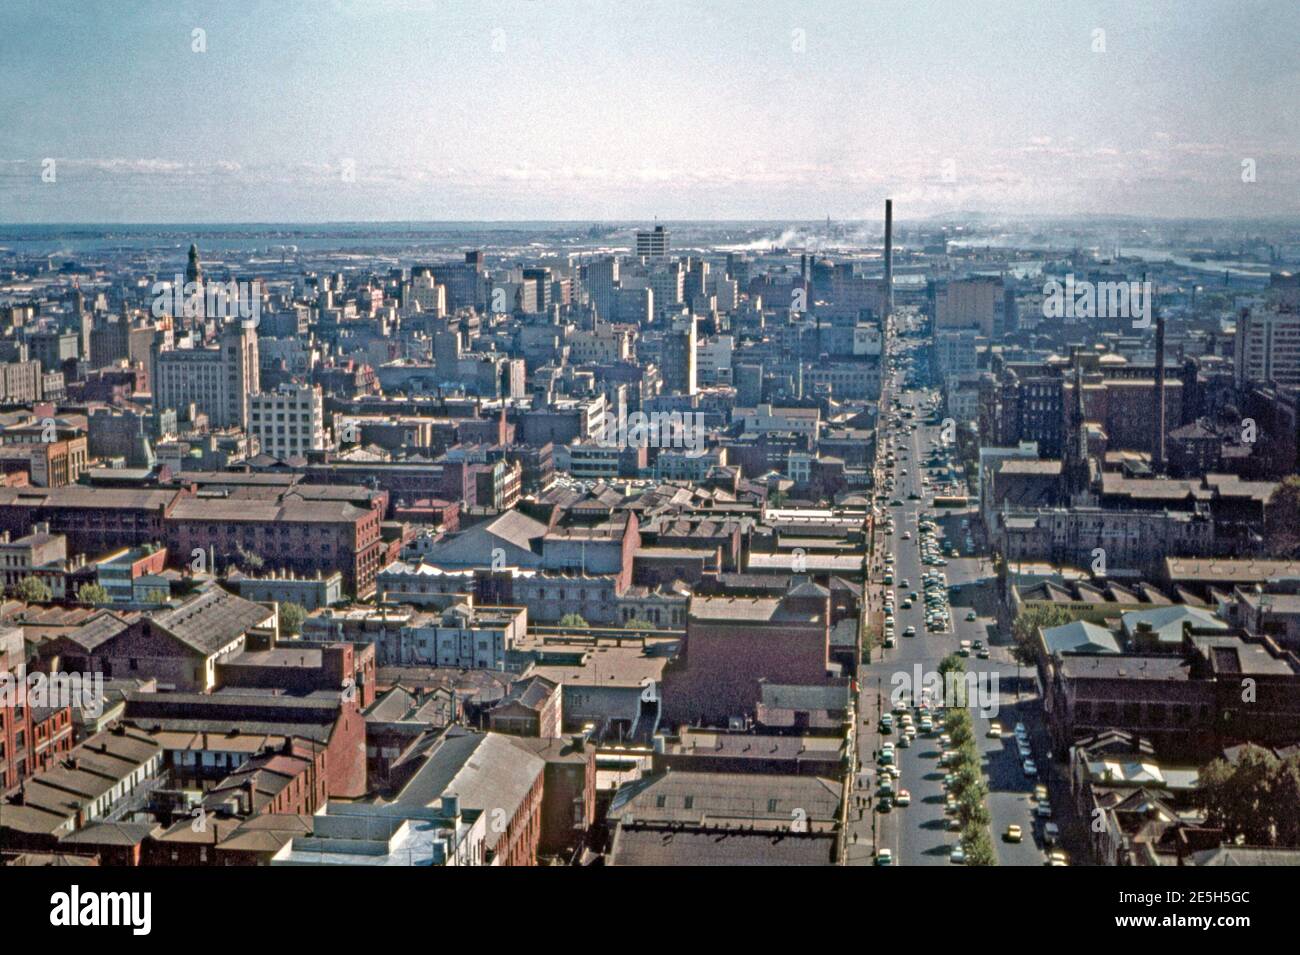 An aerial view looking west over Melbourne, Victoria, Australia in 1961, in the city’s central business district. The wide street is Lonsdale Street. Manufacturing and factory activity visible in the 1960s has almost completely been replaced by far taller buildings with a mixture of retail, office, hotel and residential usage. In the background is the Yarra River and the port district of the city. Stock Photo